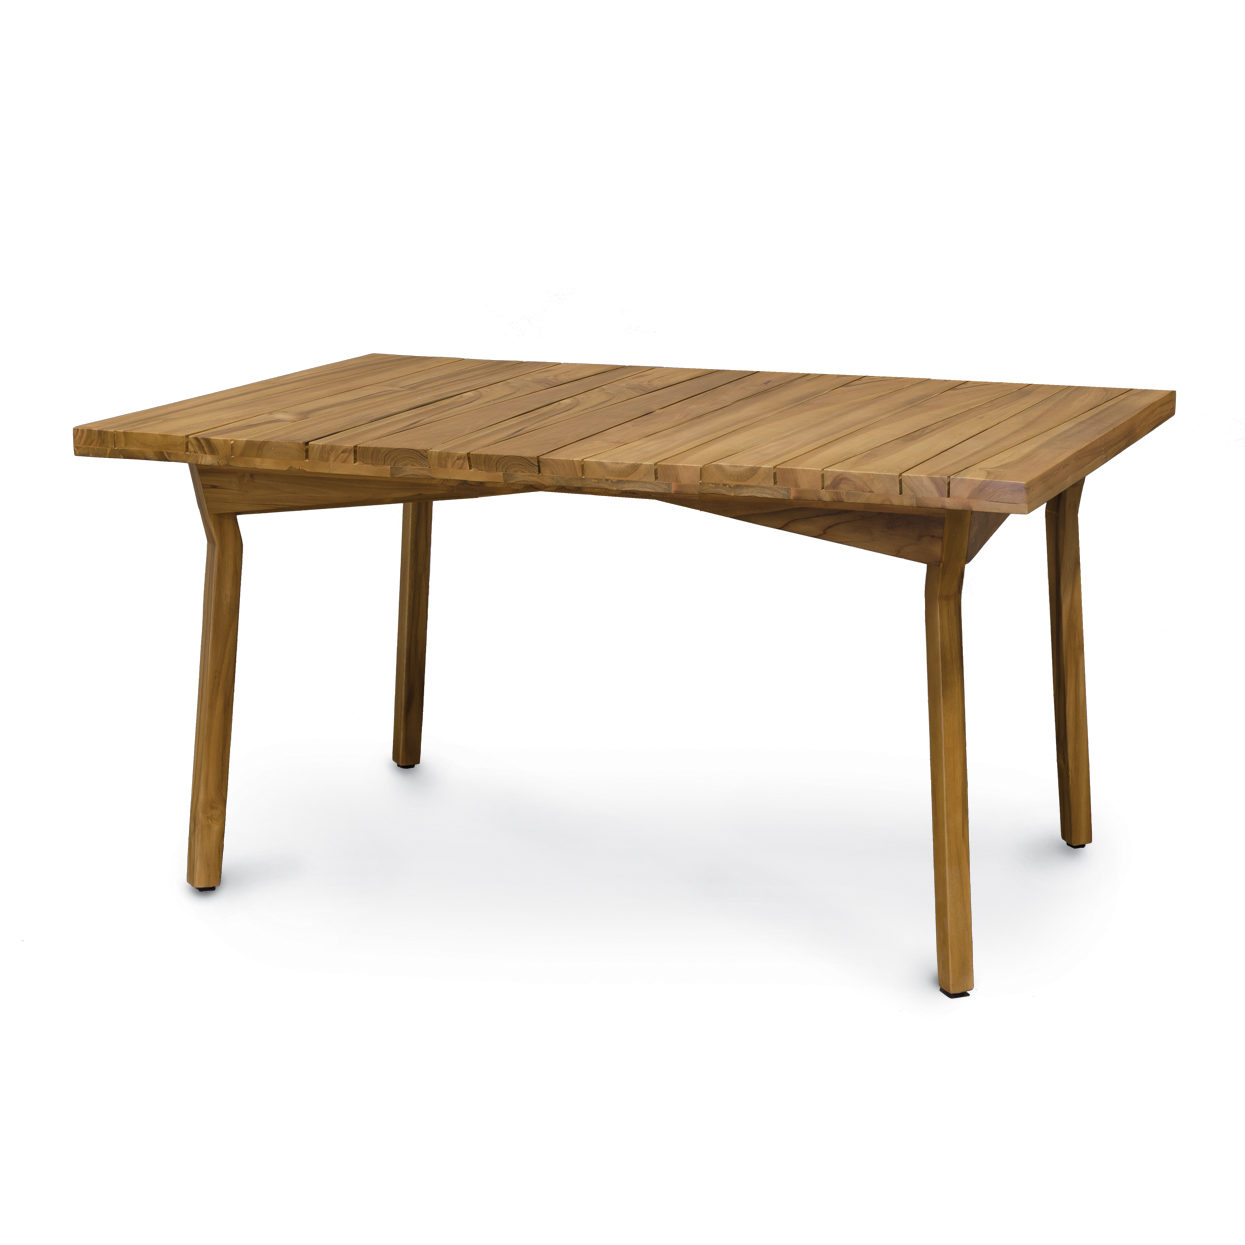 Low Maintenance Teak Dining Table: Easy To Care For